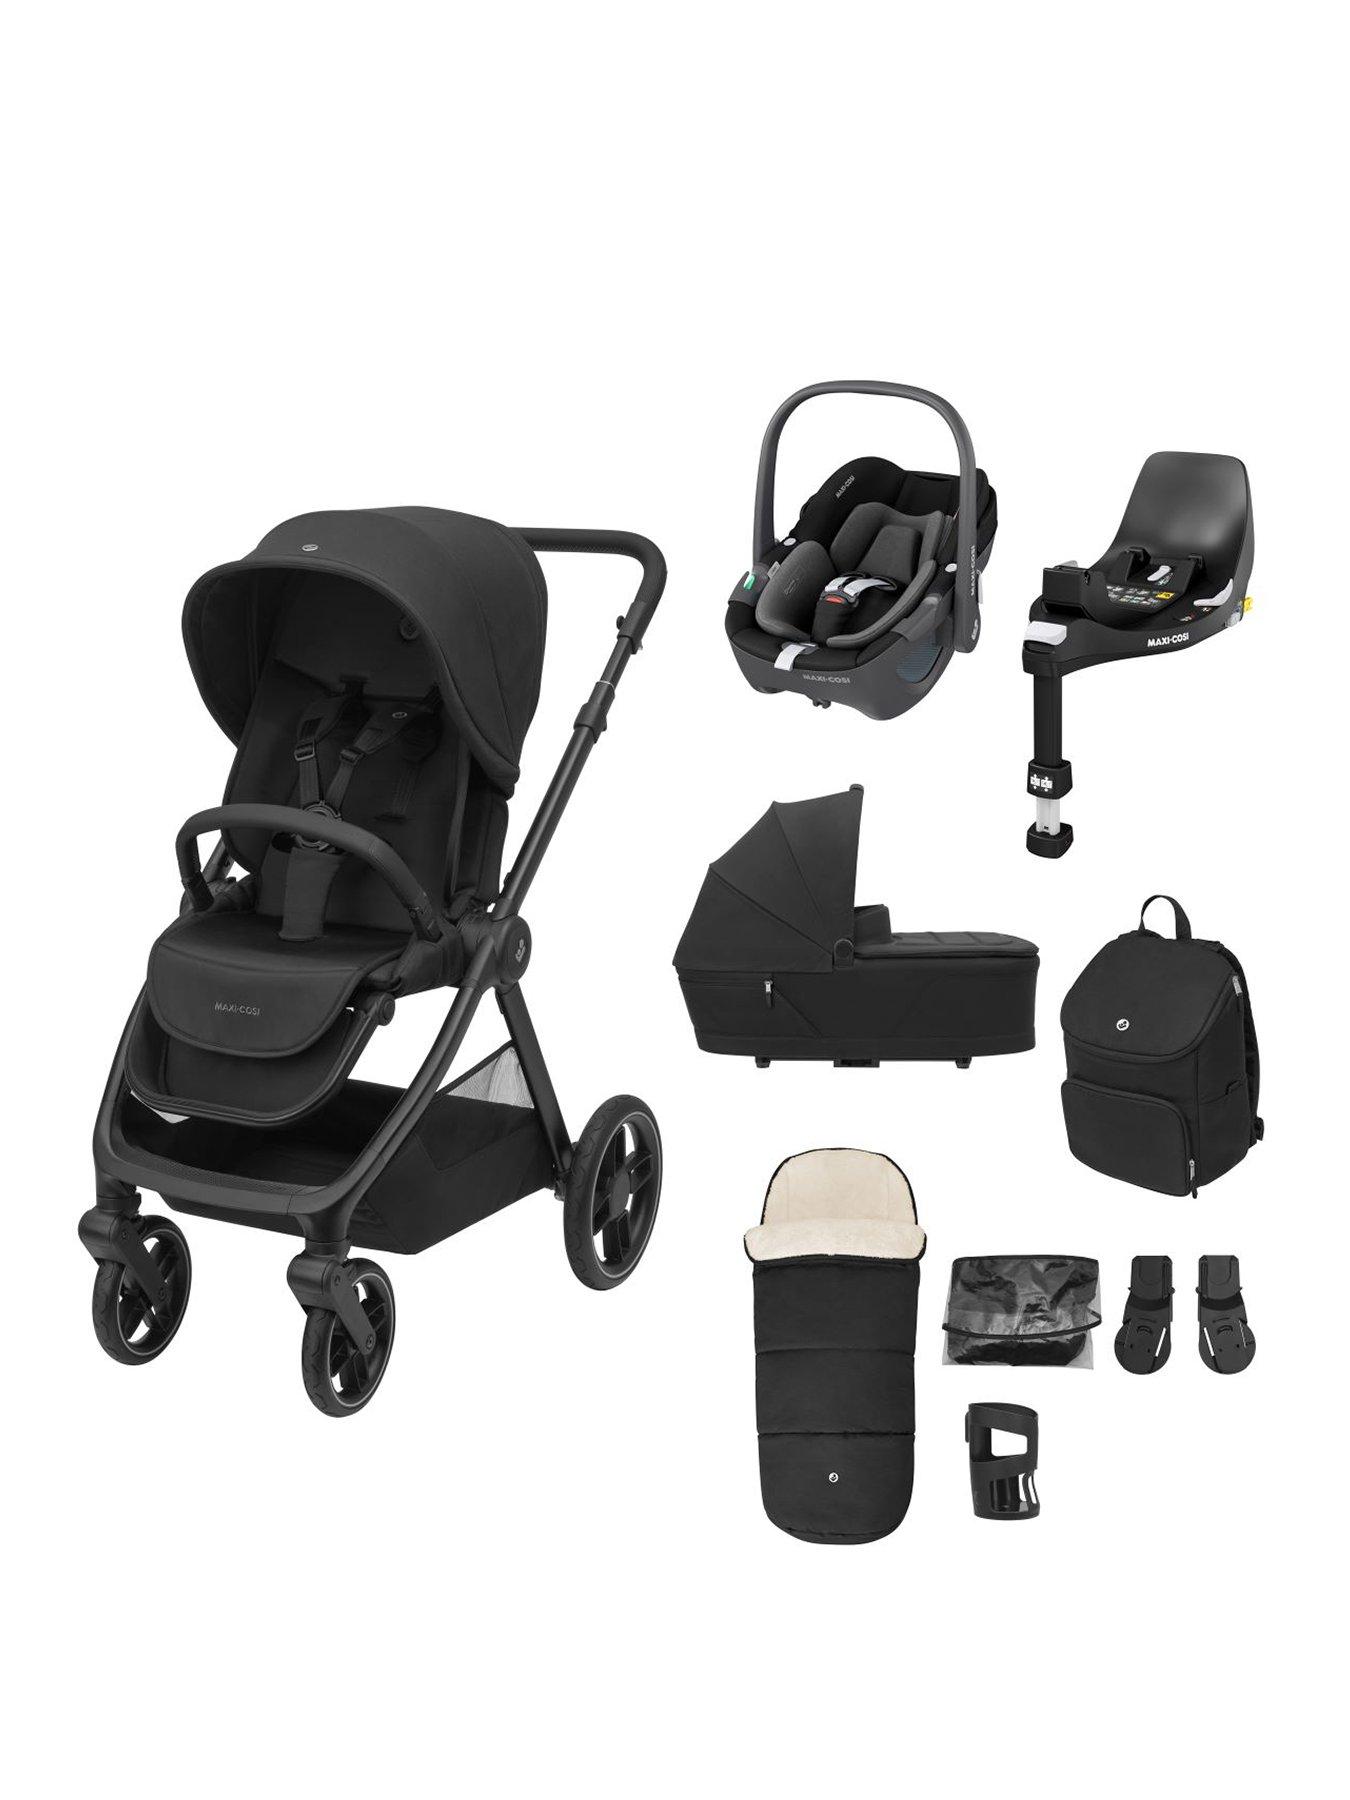 Maxi-Cosi Oxford 9 Piece Complete Travel System Twillic Black (Stroller Carrycot Back Pack Footmuff Cupholder Adapers Raincover Pebble 360 & Familyfix 360 Base